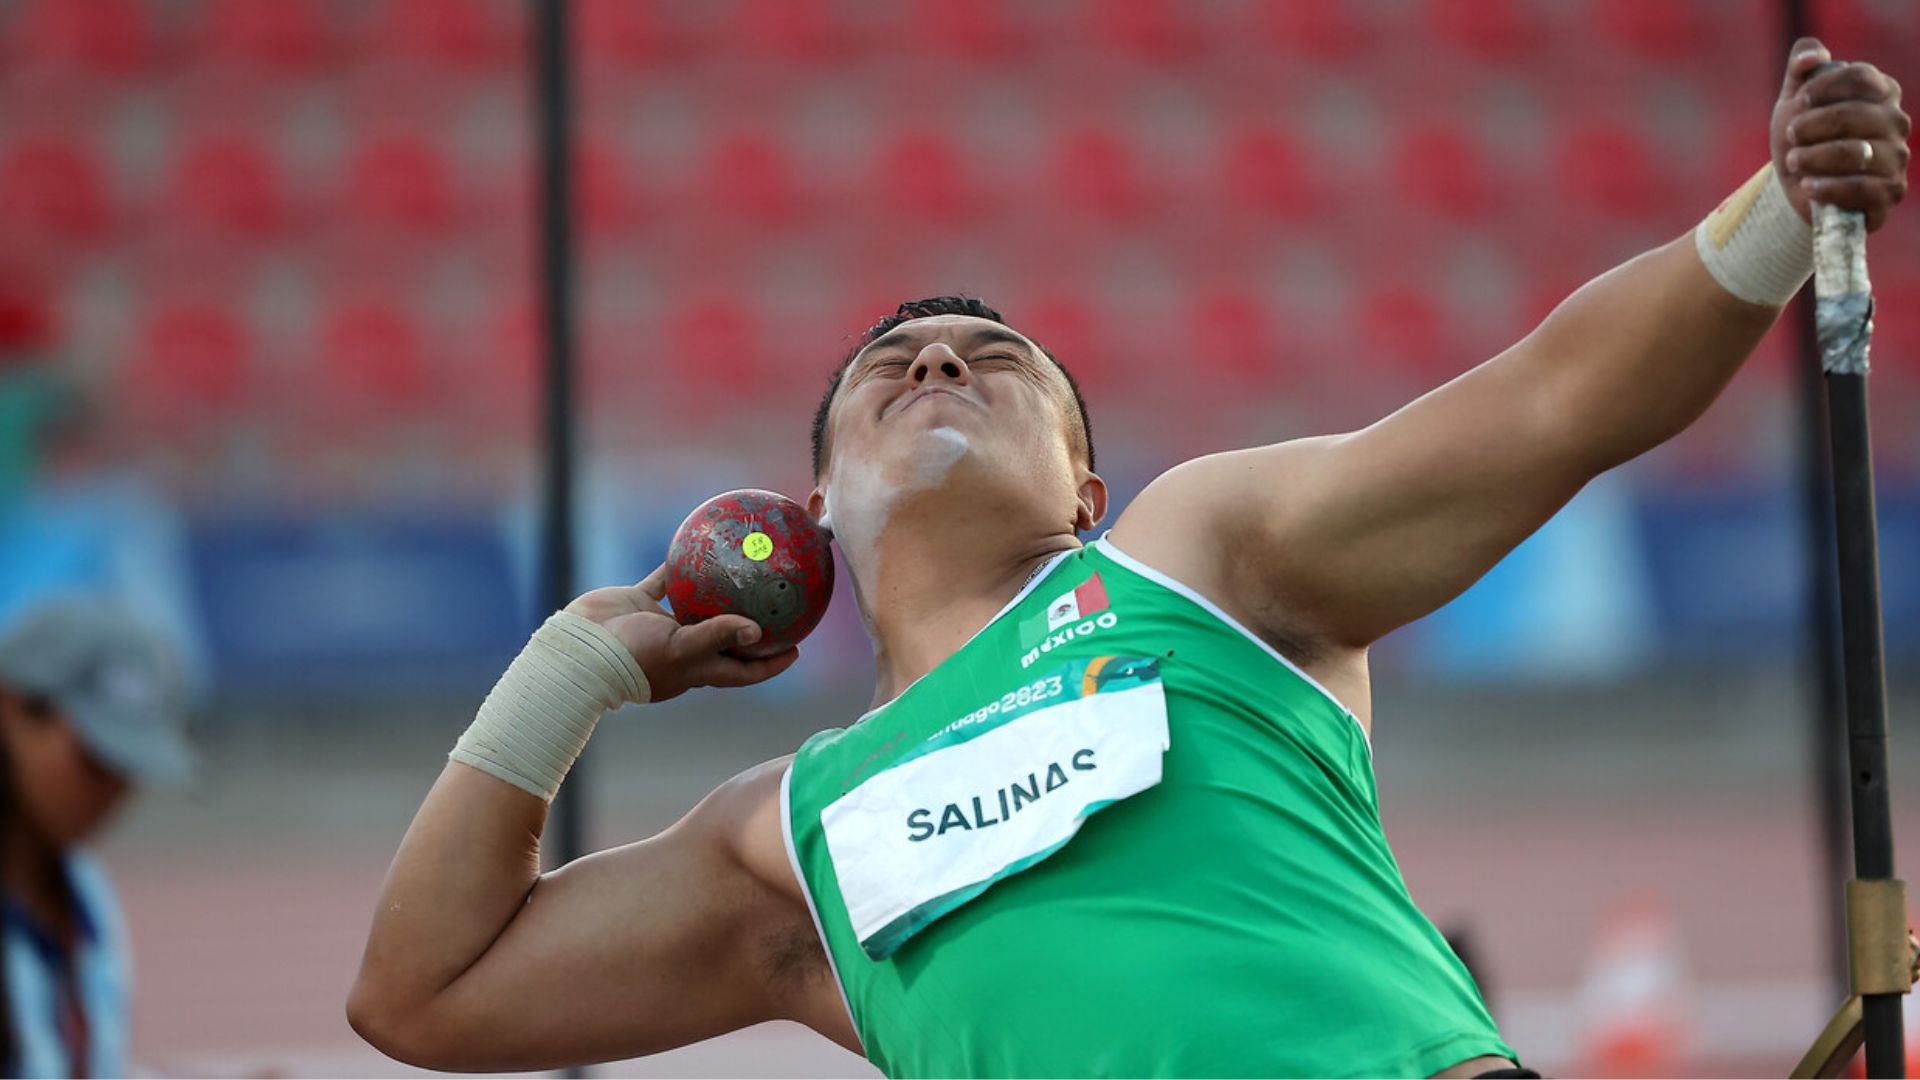 Mexican Salinas Reaffirms Gold in Shot Put F53-54, Approaches His Record